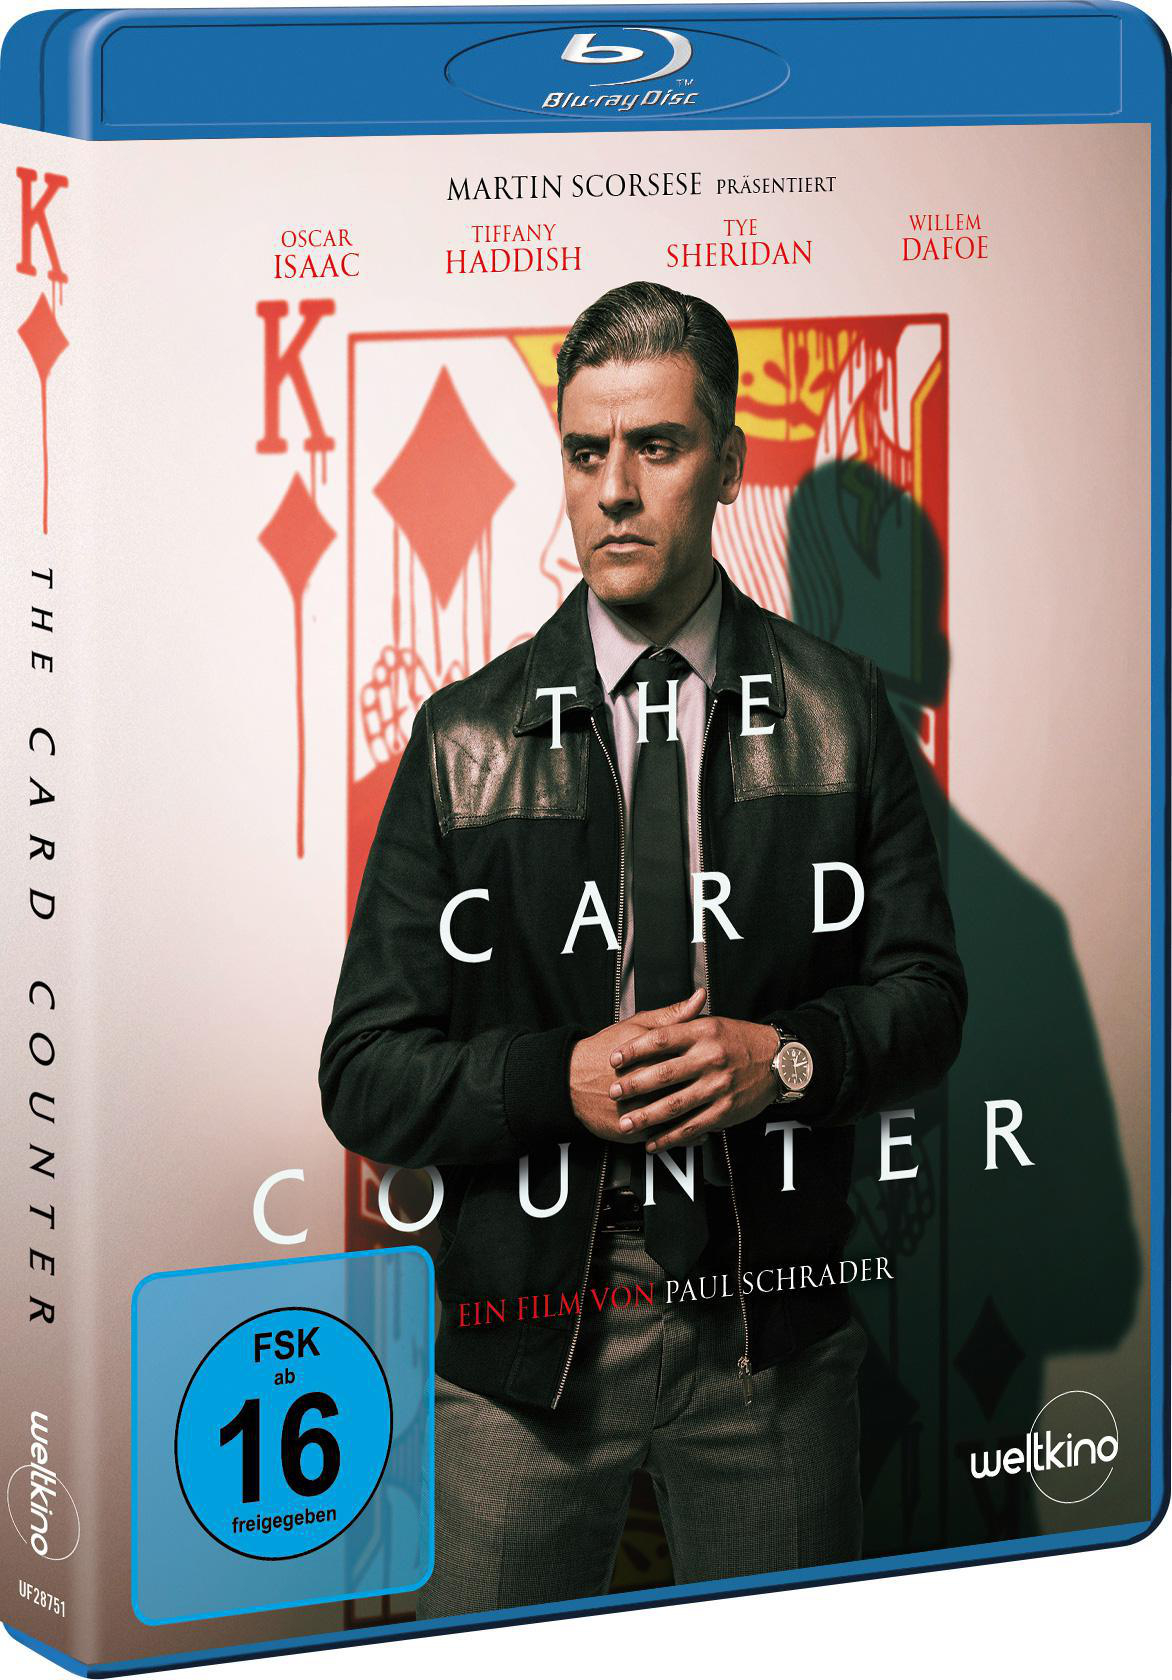 Counter Blu-ray Card The